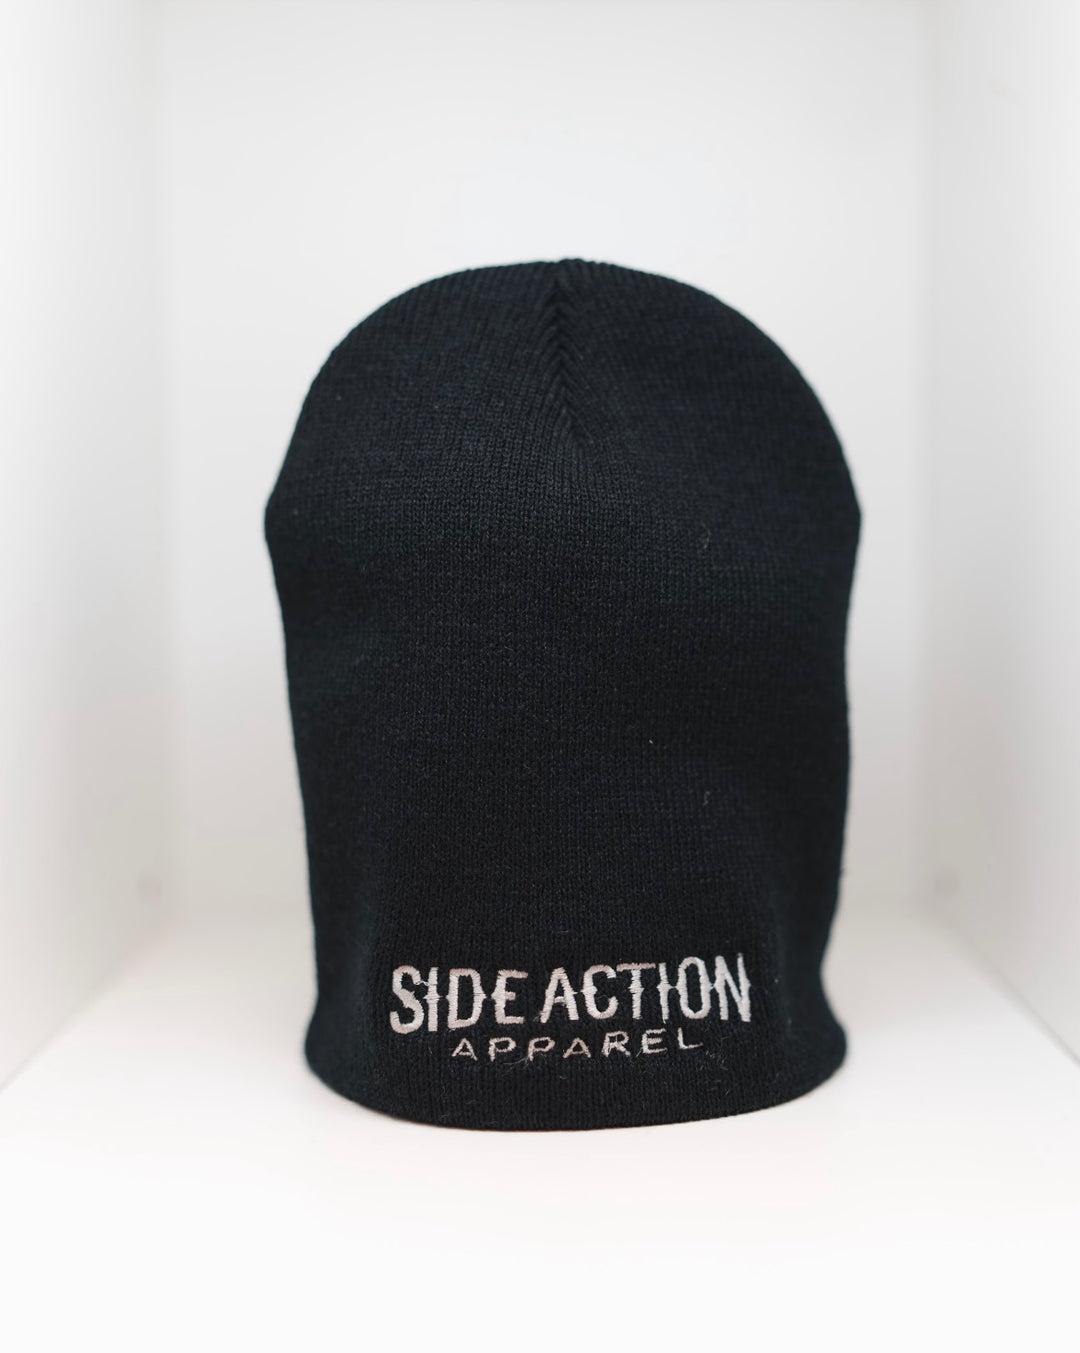 Side Action Apparel Black Beanie